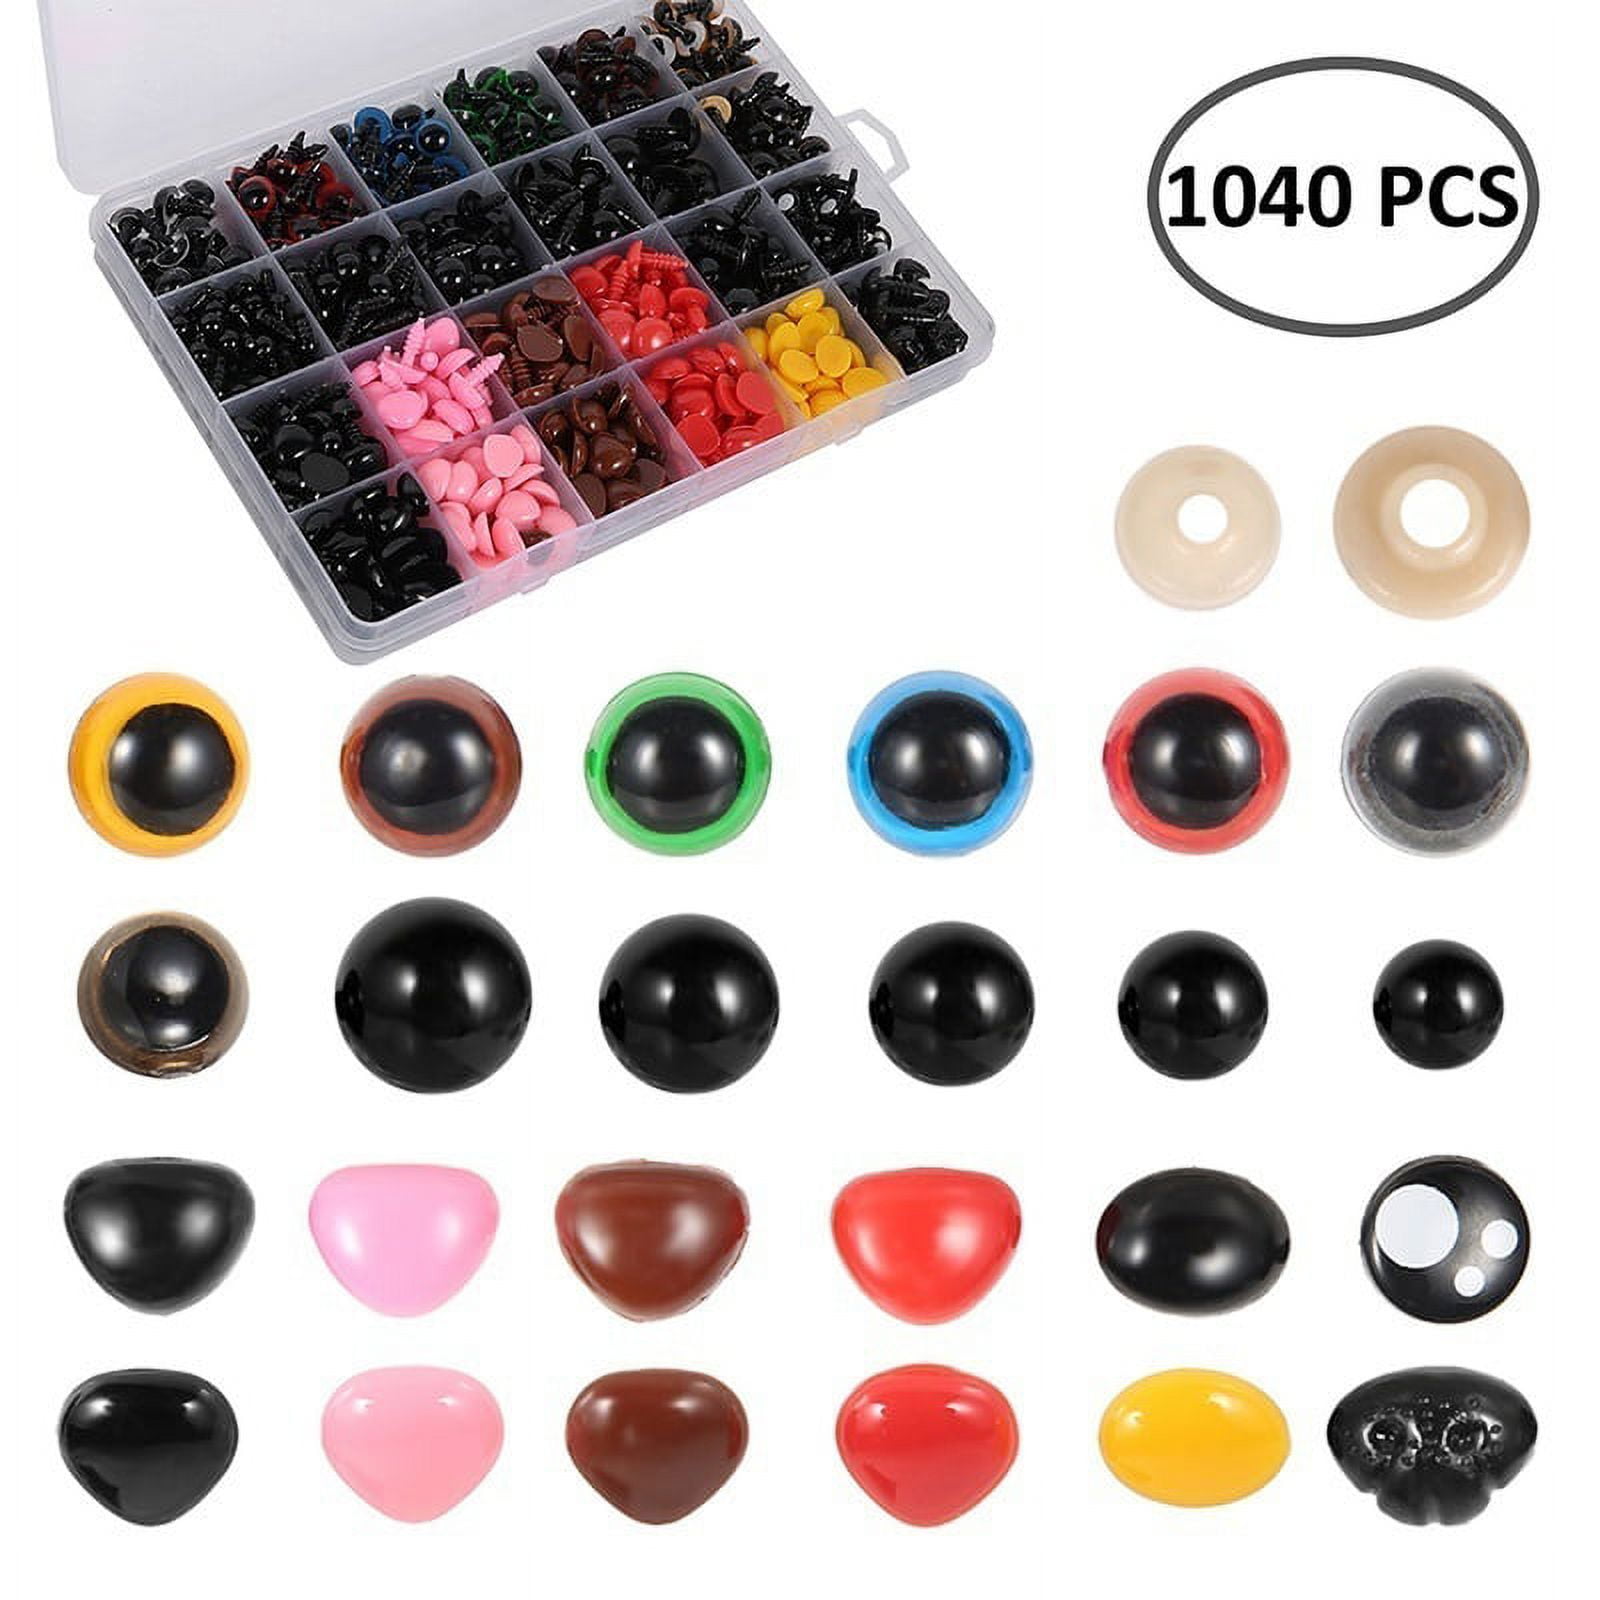 10mm x 8mm Black Oval Safety Eyes Noses - 25 Pairs (50 Pieces Eyes, 50  Pieces Washers)